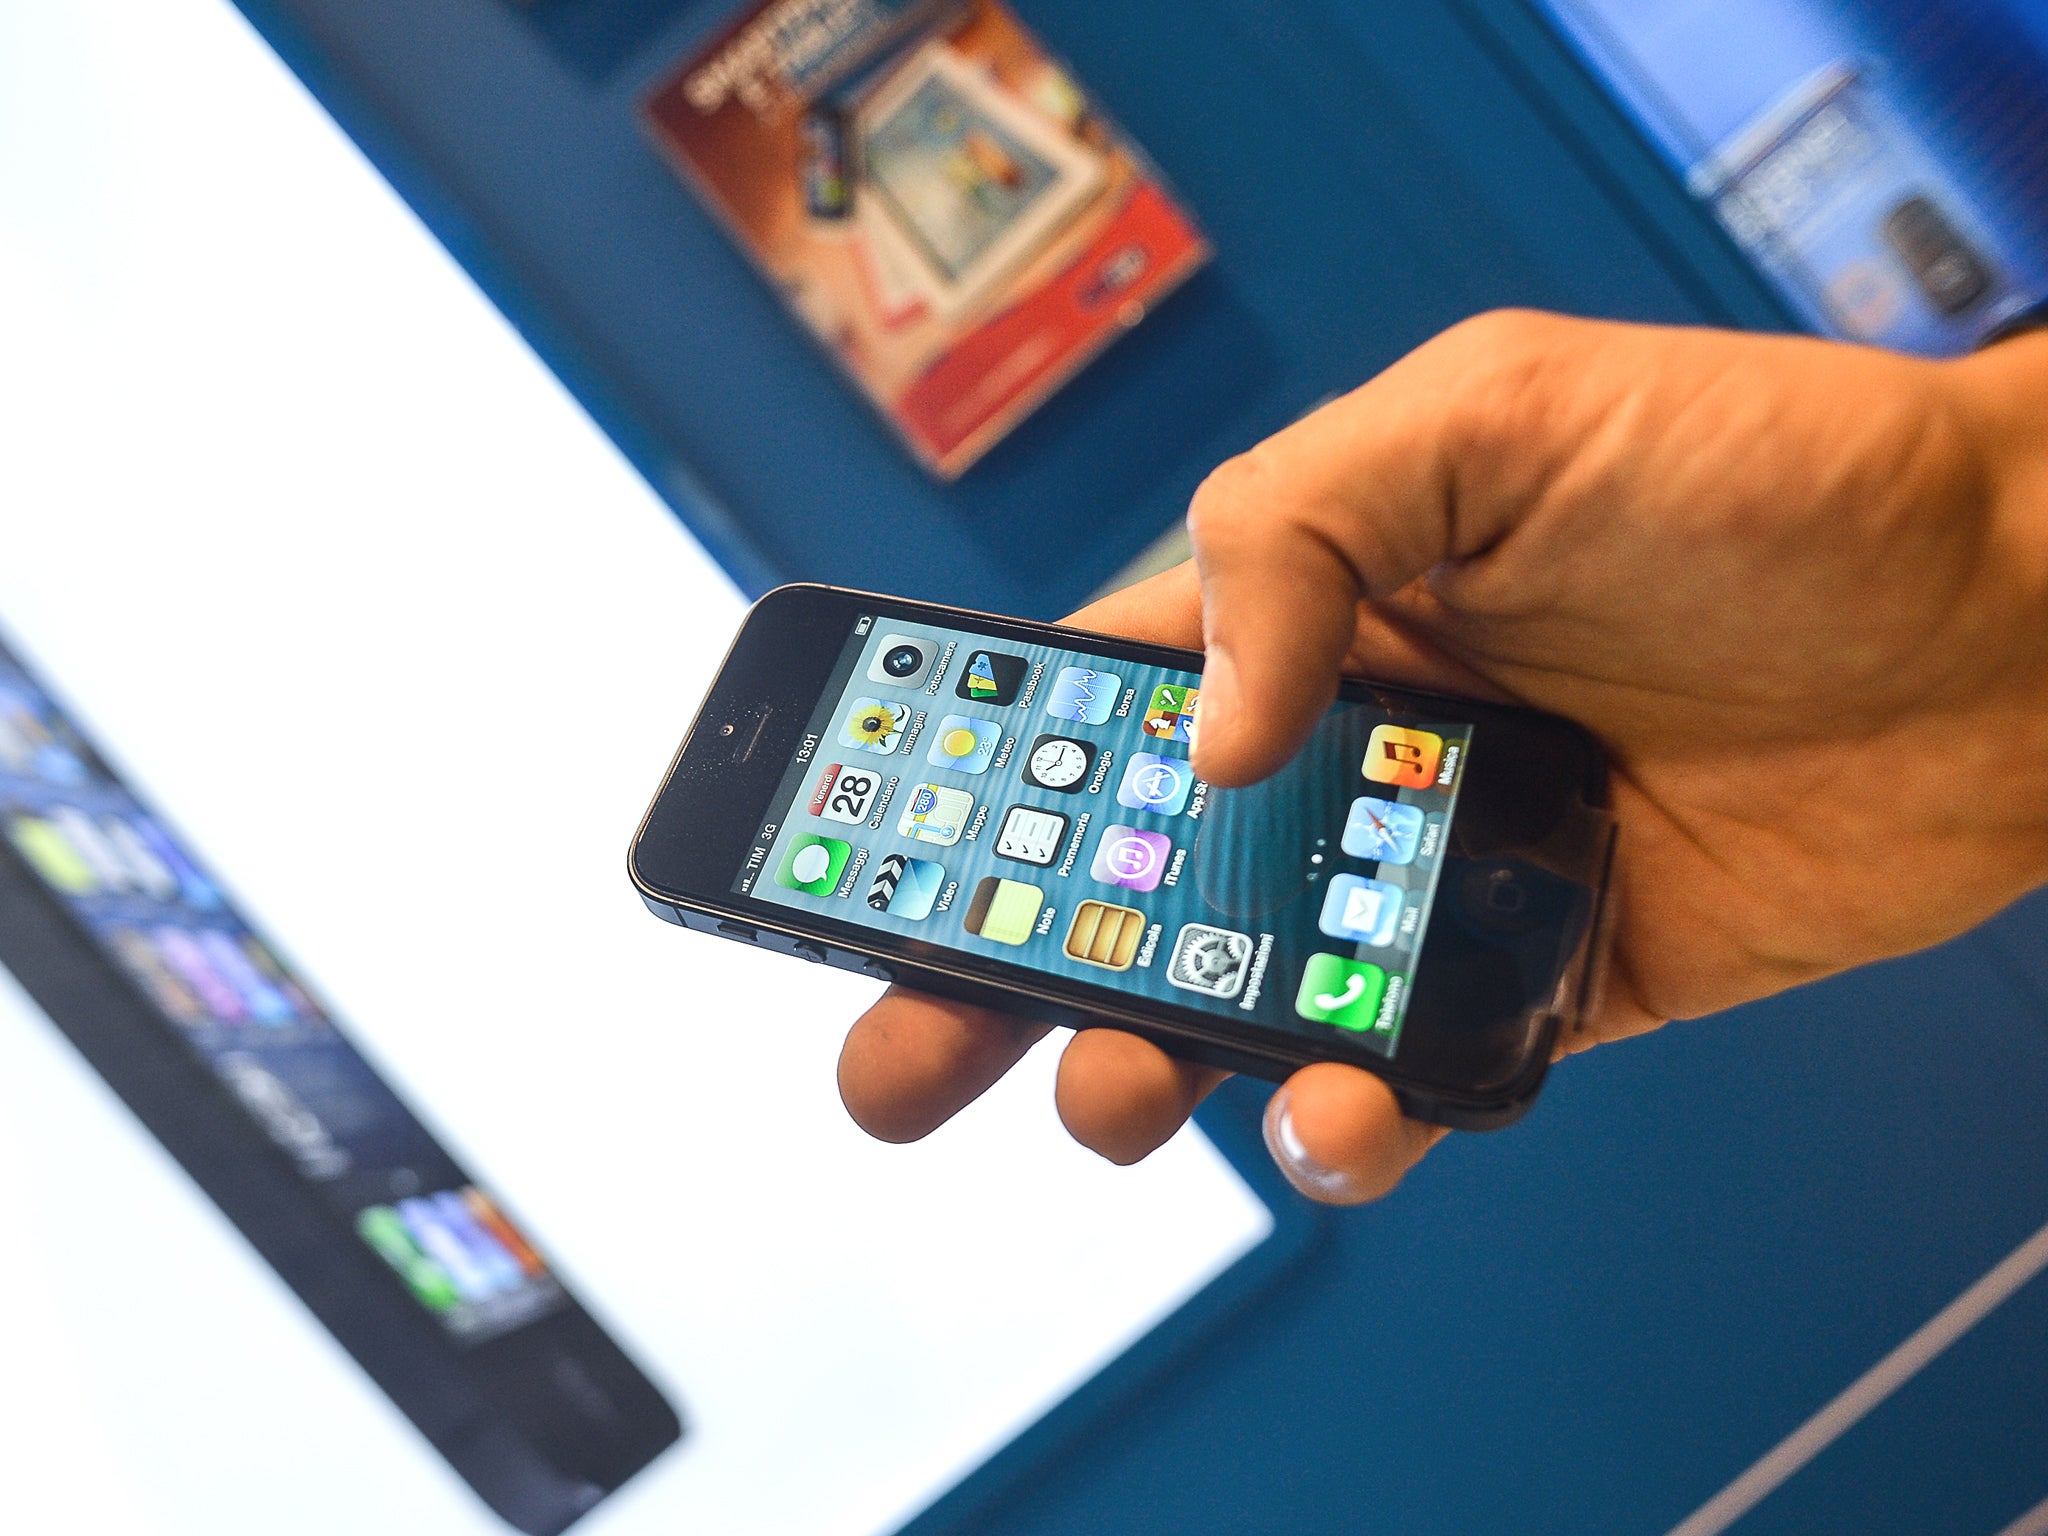 Apple has seen share price tumble by a quarter since September when iPhone5 debuted